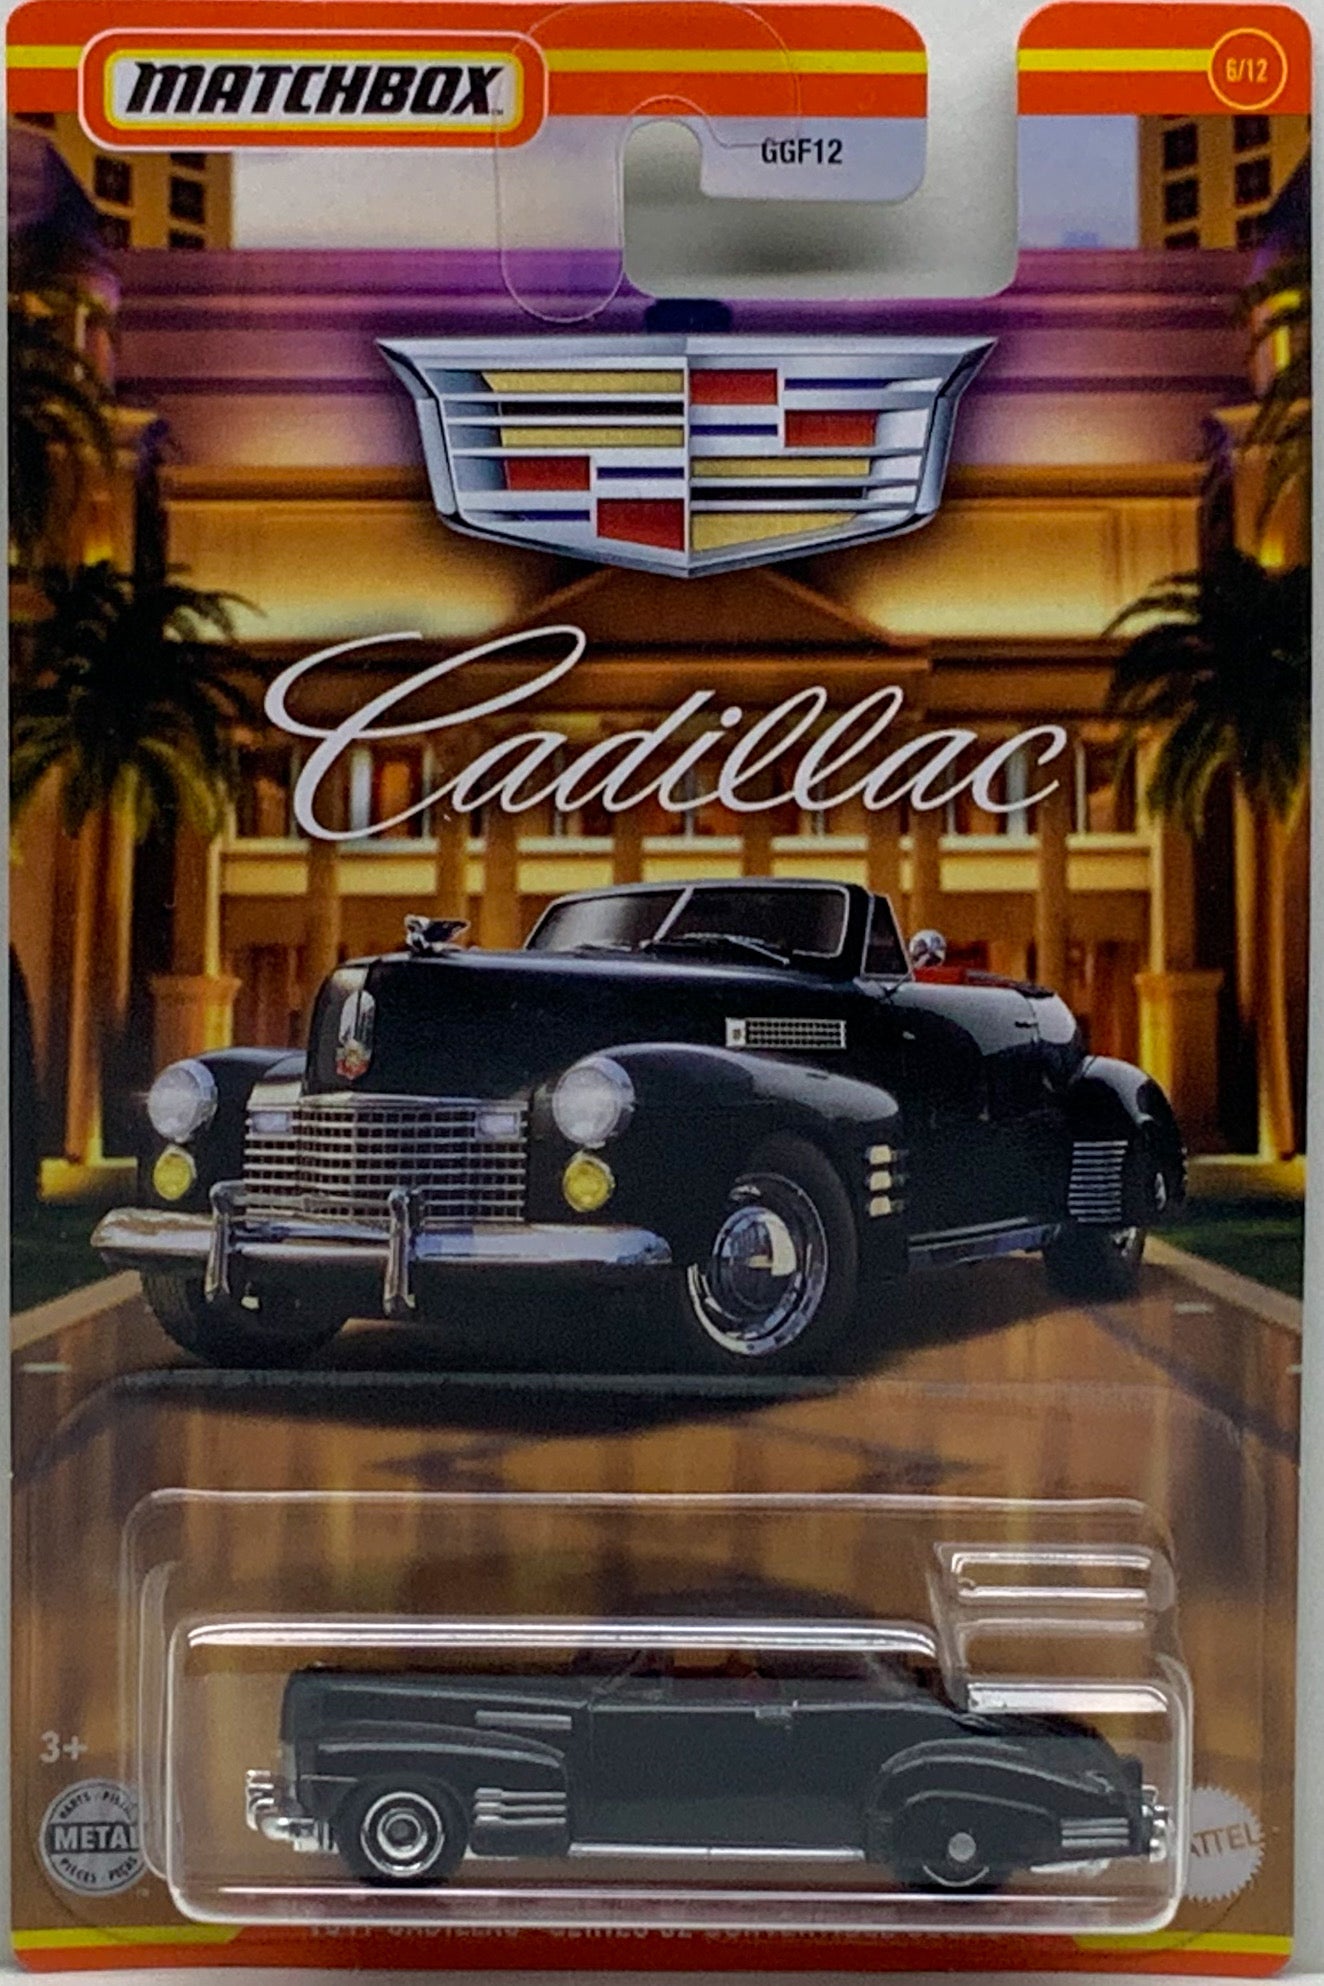 Buy at Tatoy Matchbox Cadillac Series 1941 Cadillac Series 62 Convertible Coupe Number 6 from set of 12 Mattel GGF12